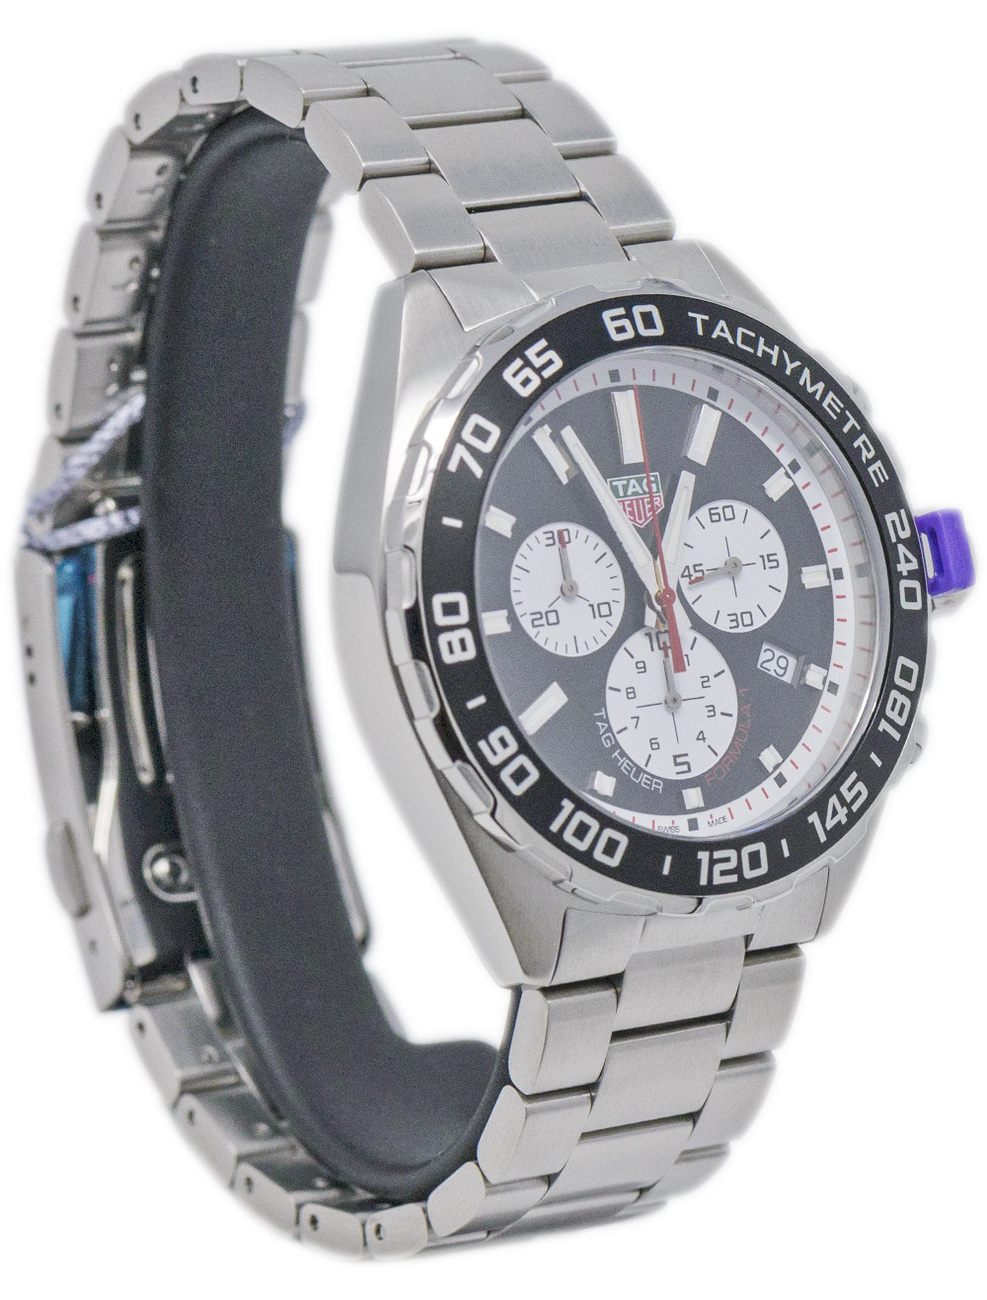 Sale watches tag heuer formula 1 tag heuer price